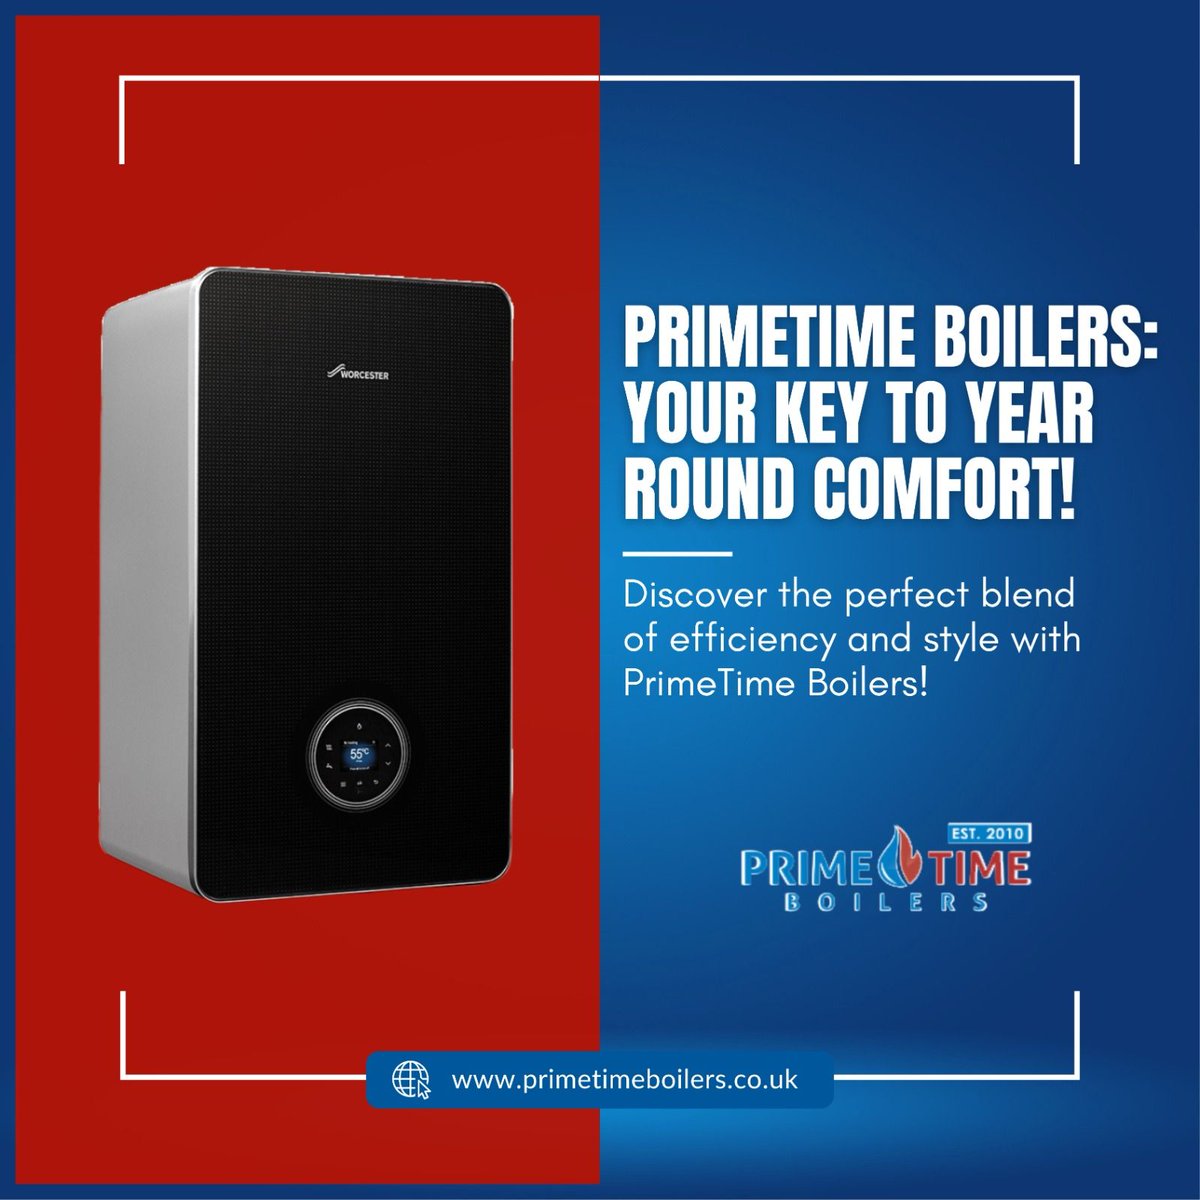 Discover the perfect blend of efficiency and style with PrimeTime Boilers! 🔥 Our cutting-edge heating systems ensure your home remains warm and cozy, no matter the season. With sleek designs and unparalleled performance.
.
.
.
.
#PrimeTimeBoilers #HomeComfort #EfficientHeating